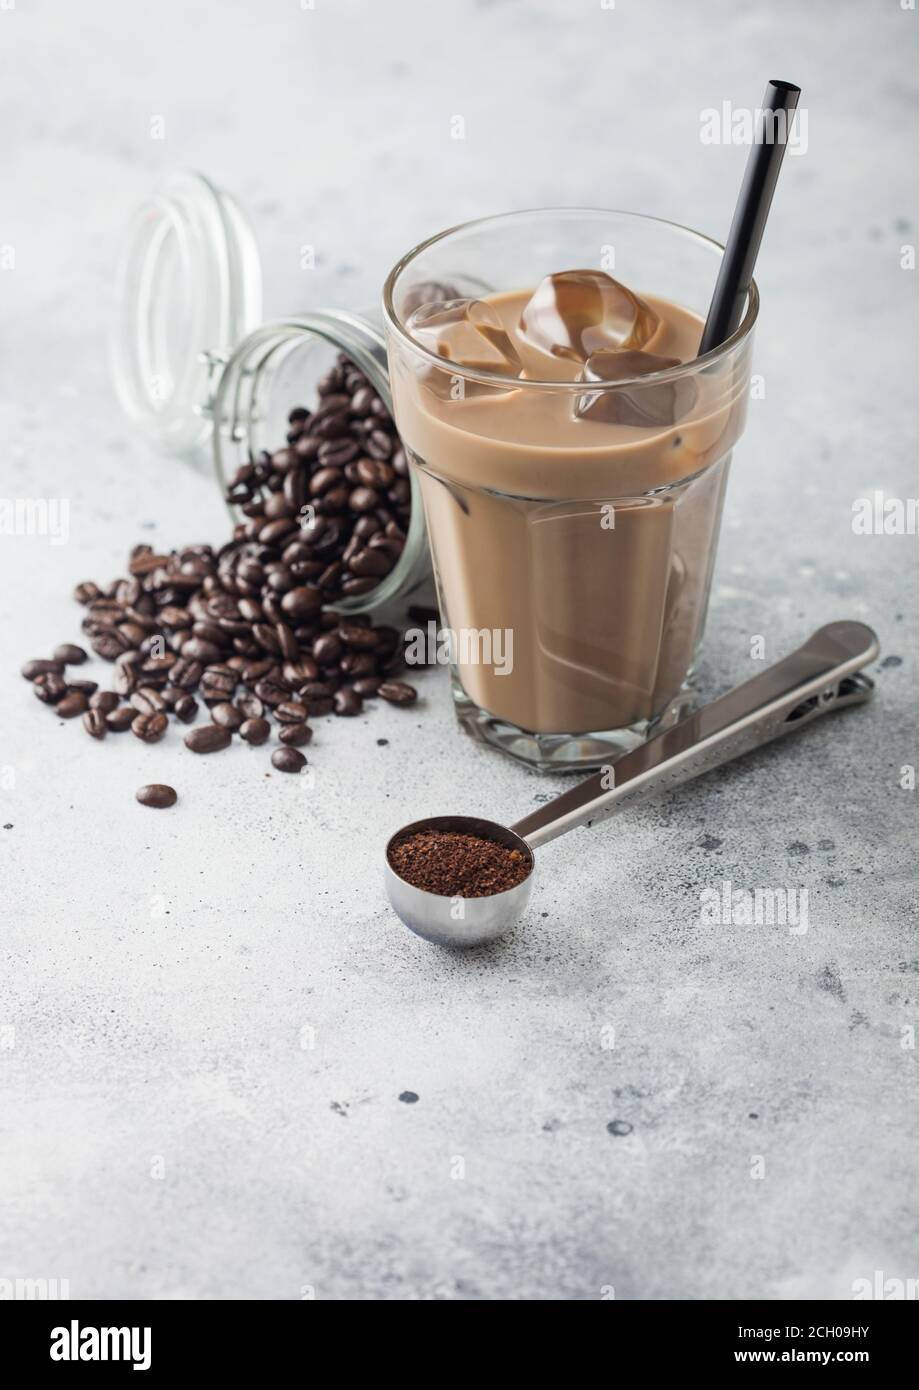 https://c8.alamy.com/comp/2CH09HY/glass-of-iced-coffee-with-milk-with-jar-of-coffee-beans-and-silver-scoop-on-light-table-background-2CH09HY.jpg